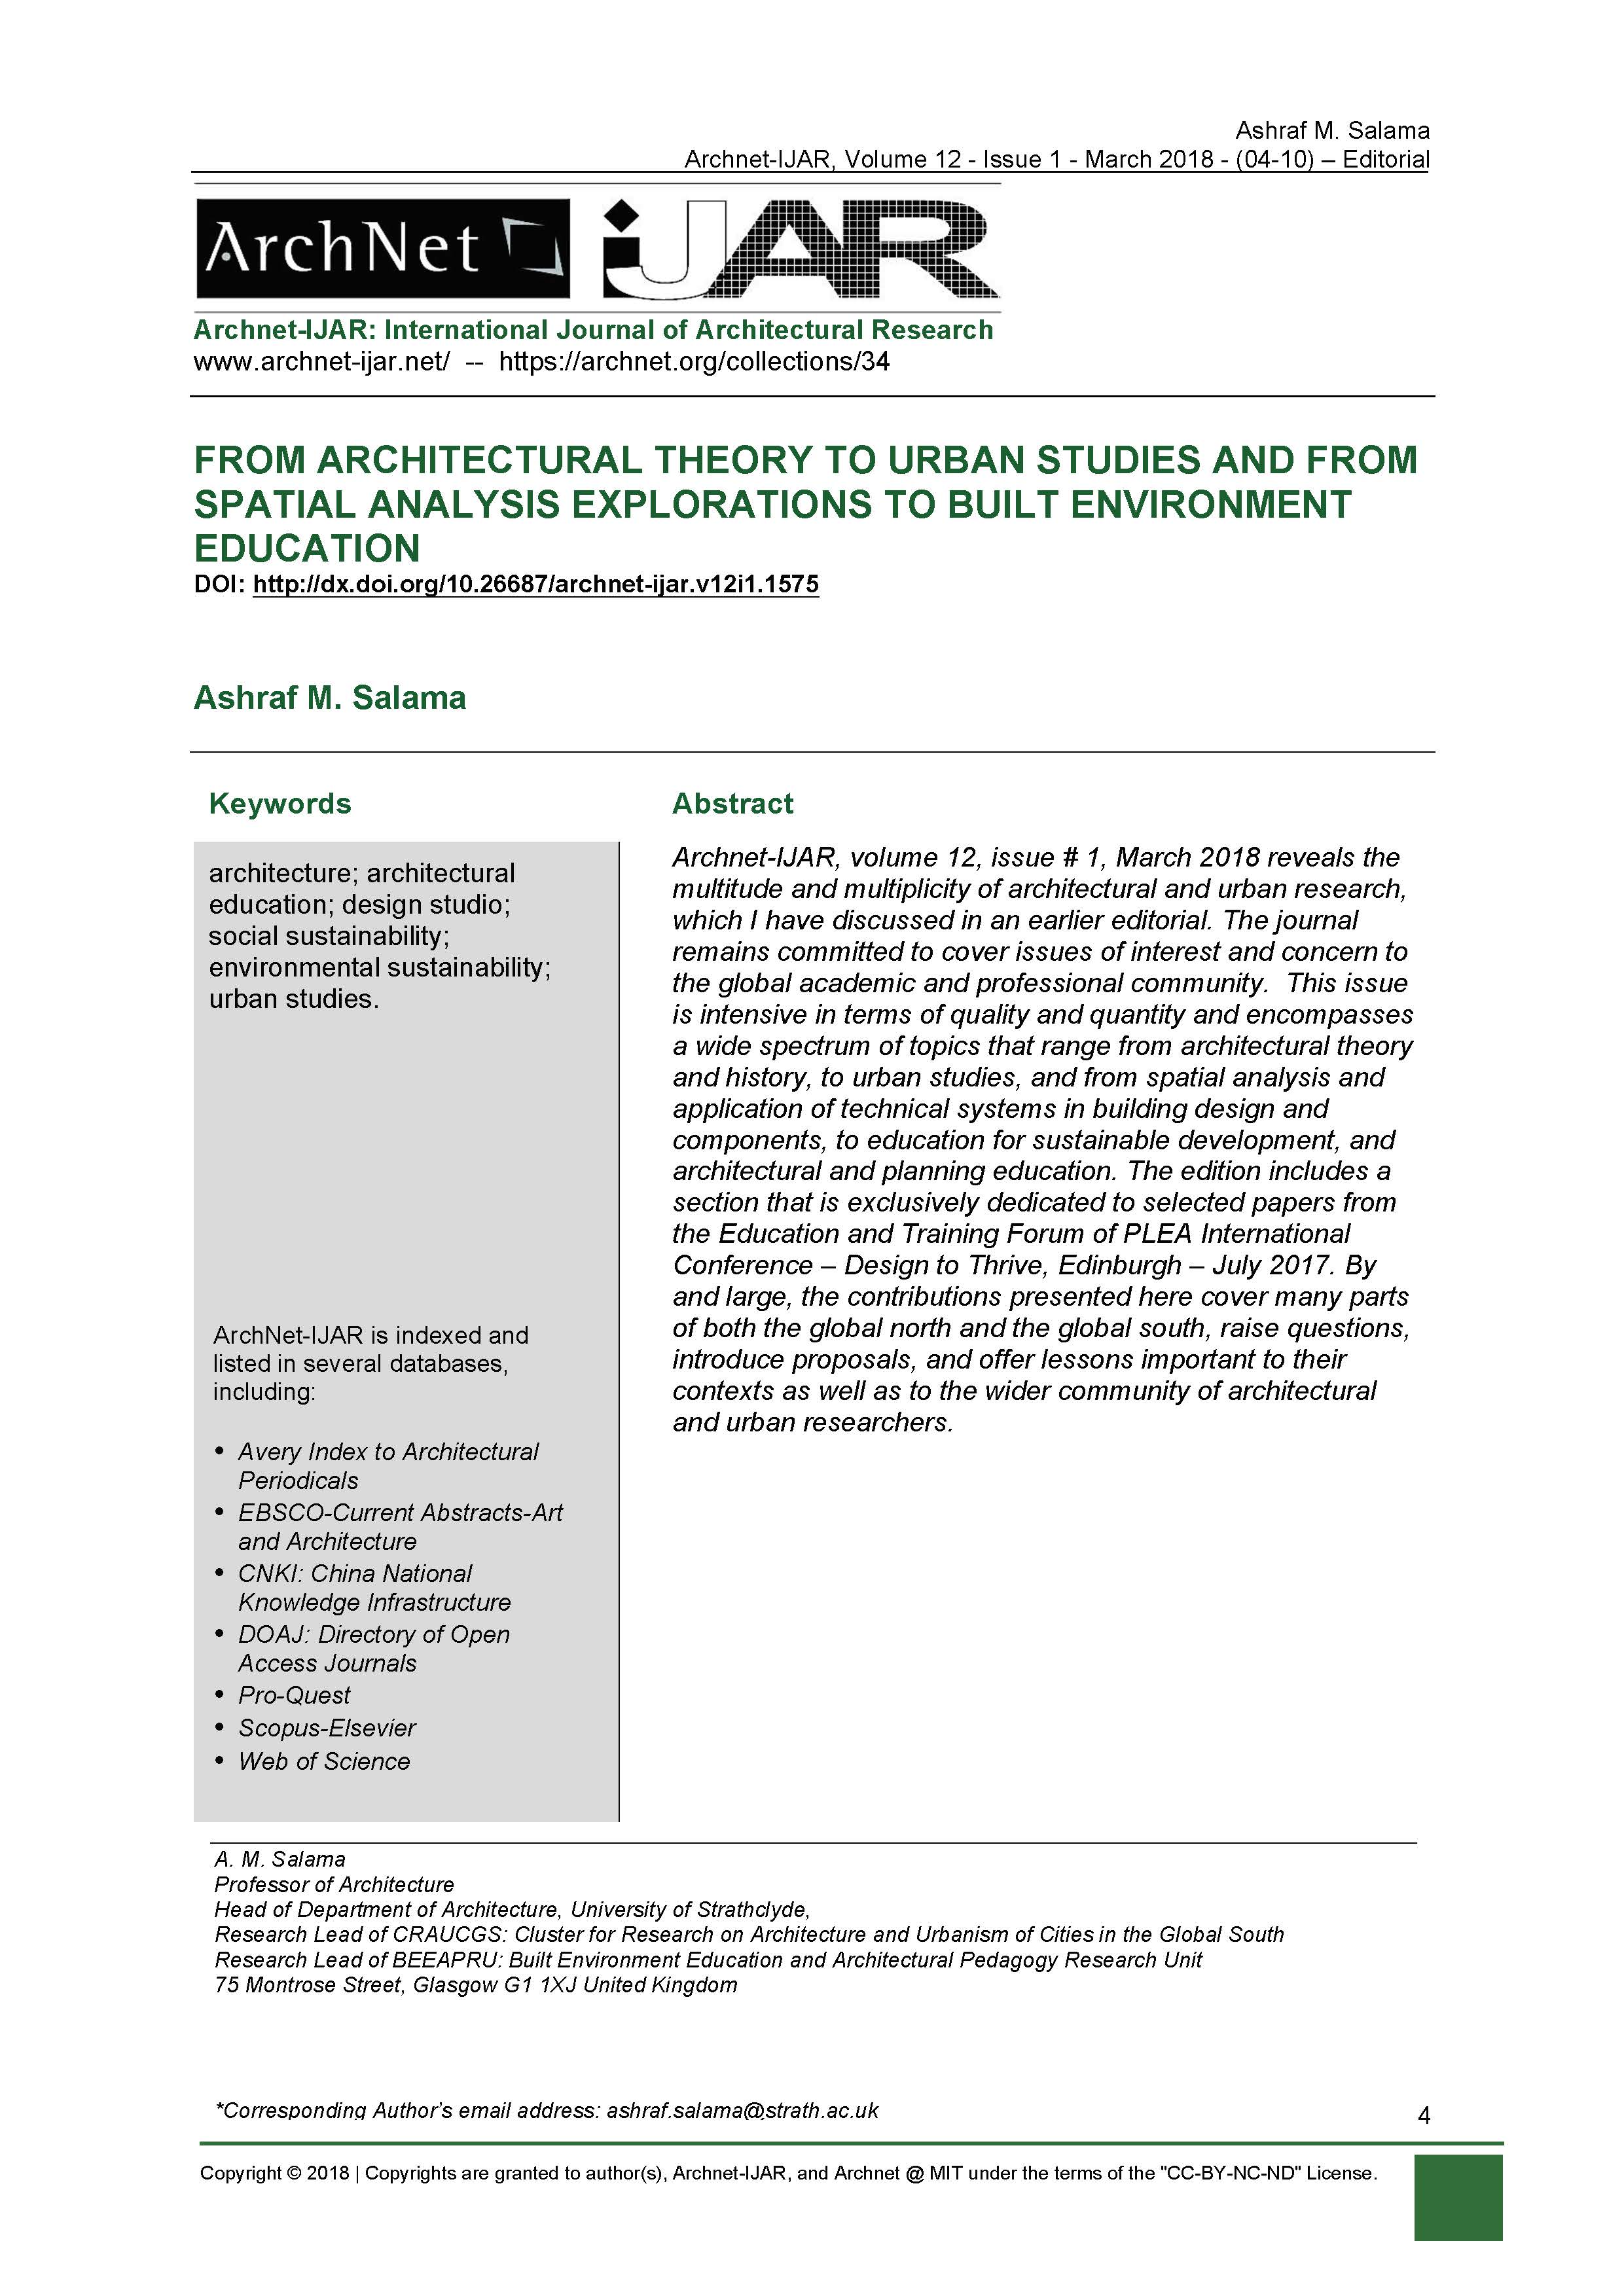 From Architectural Theory to Urban Studies and from Spatial Analysis Explorations to Built Environment Education